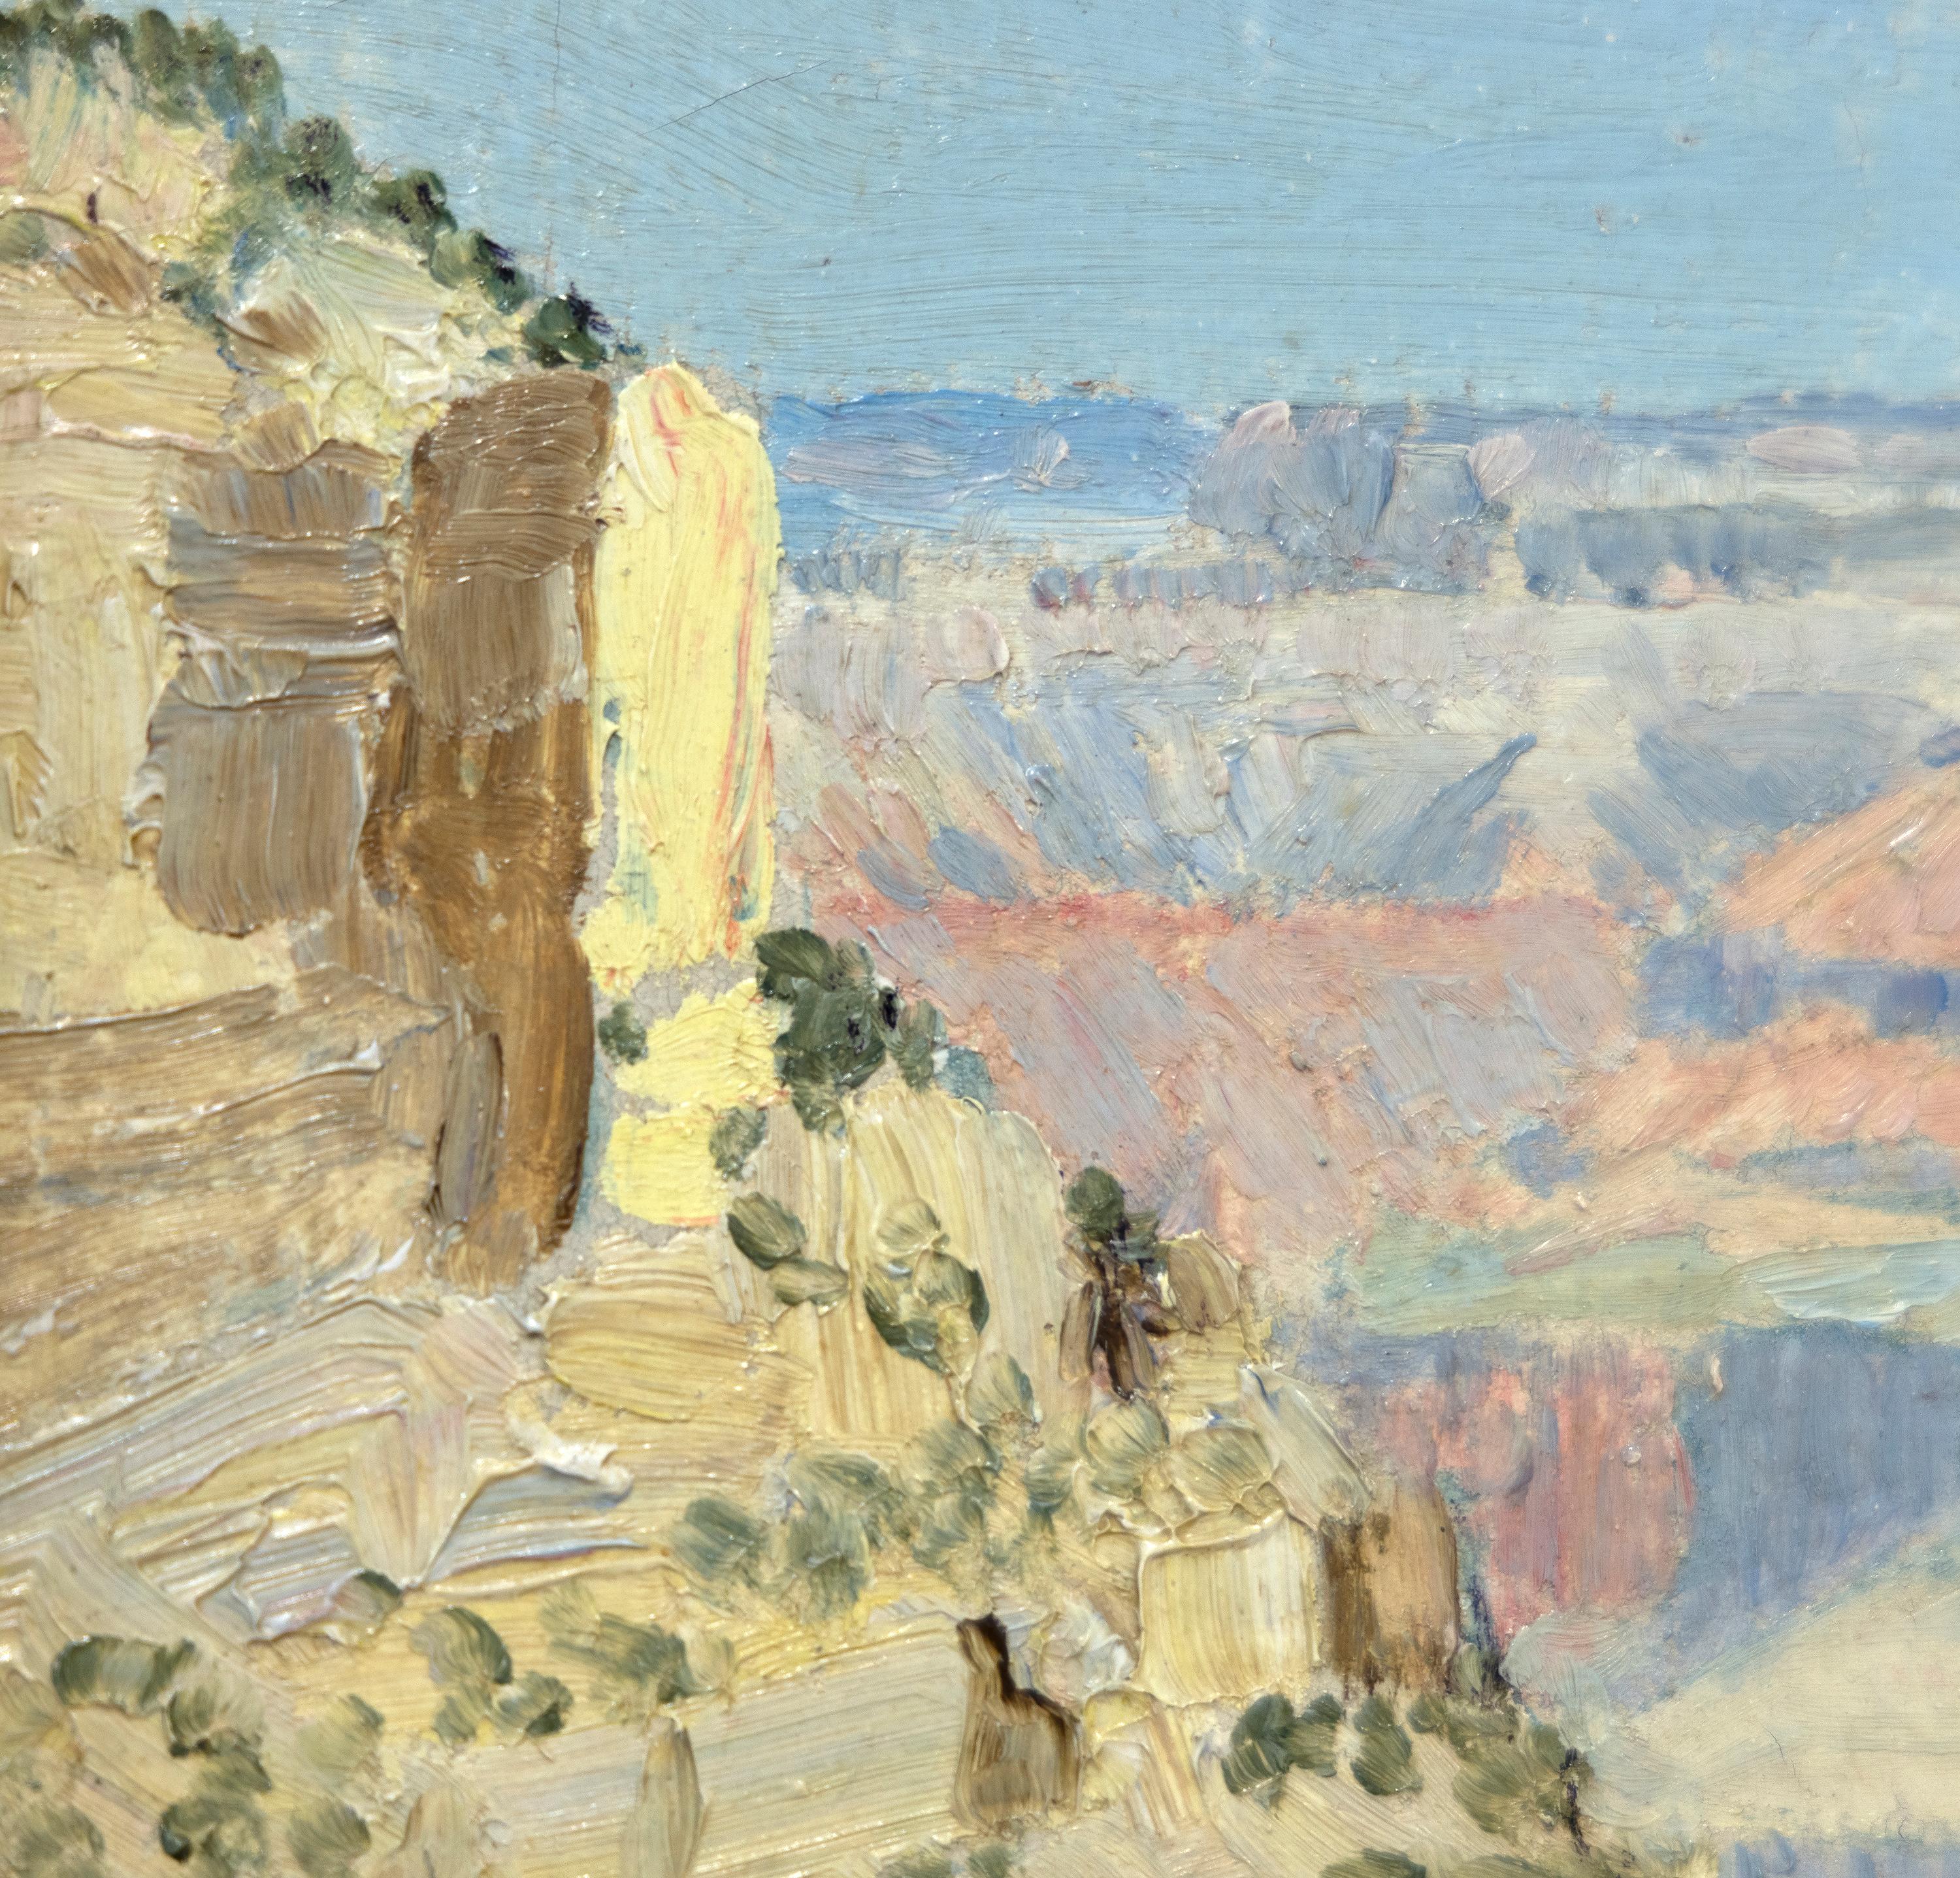 Grand Canyon Series - American Realist Painting by Sheldon Parsons